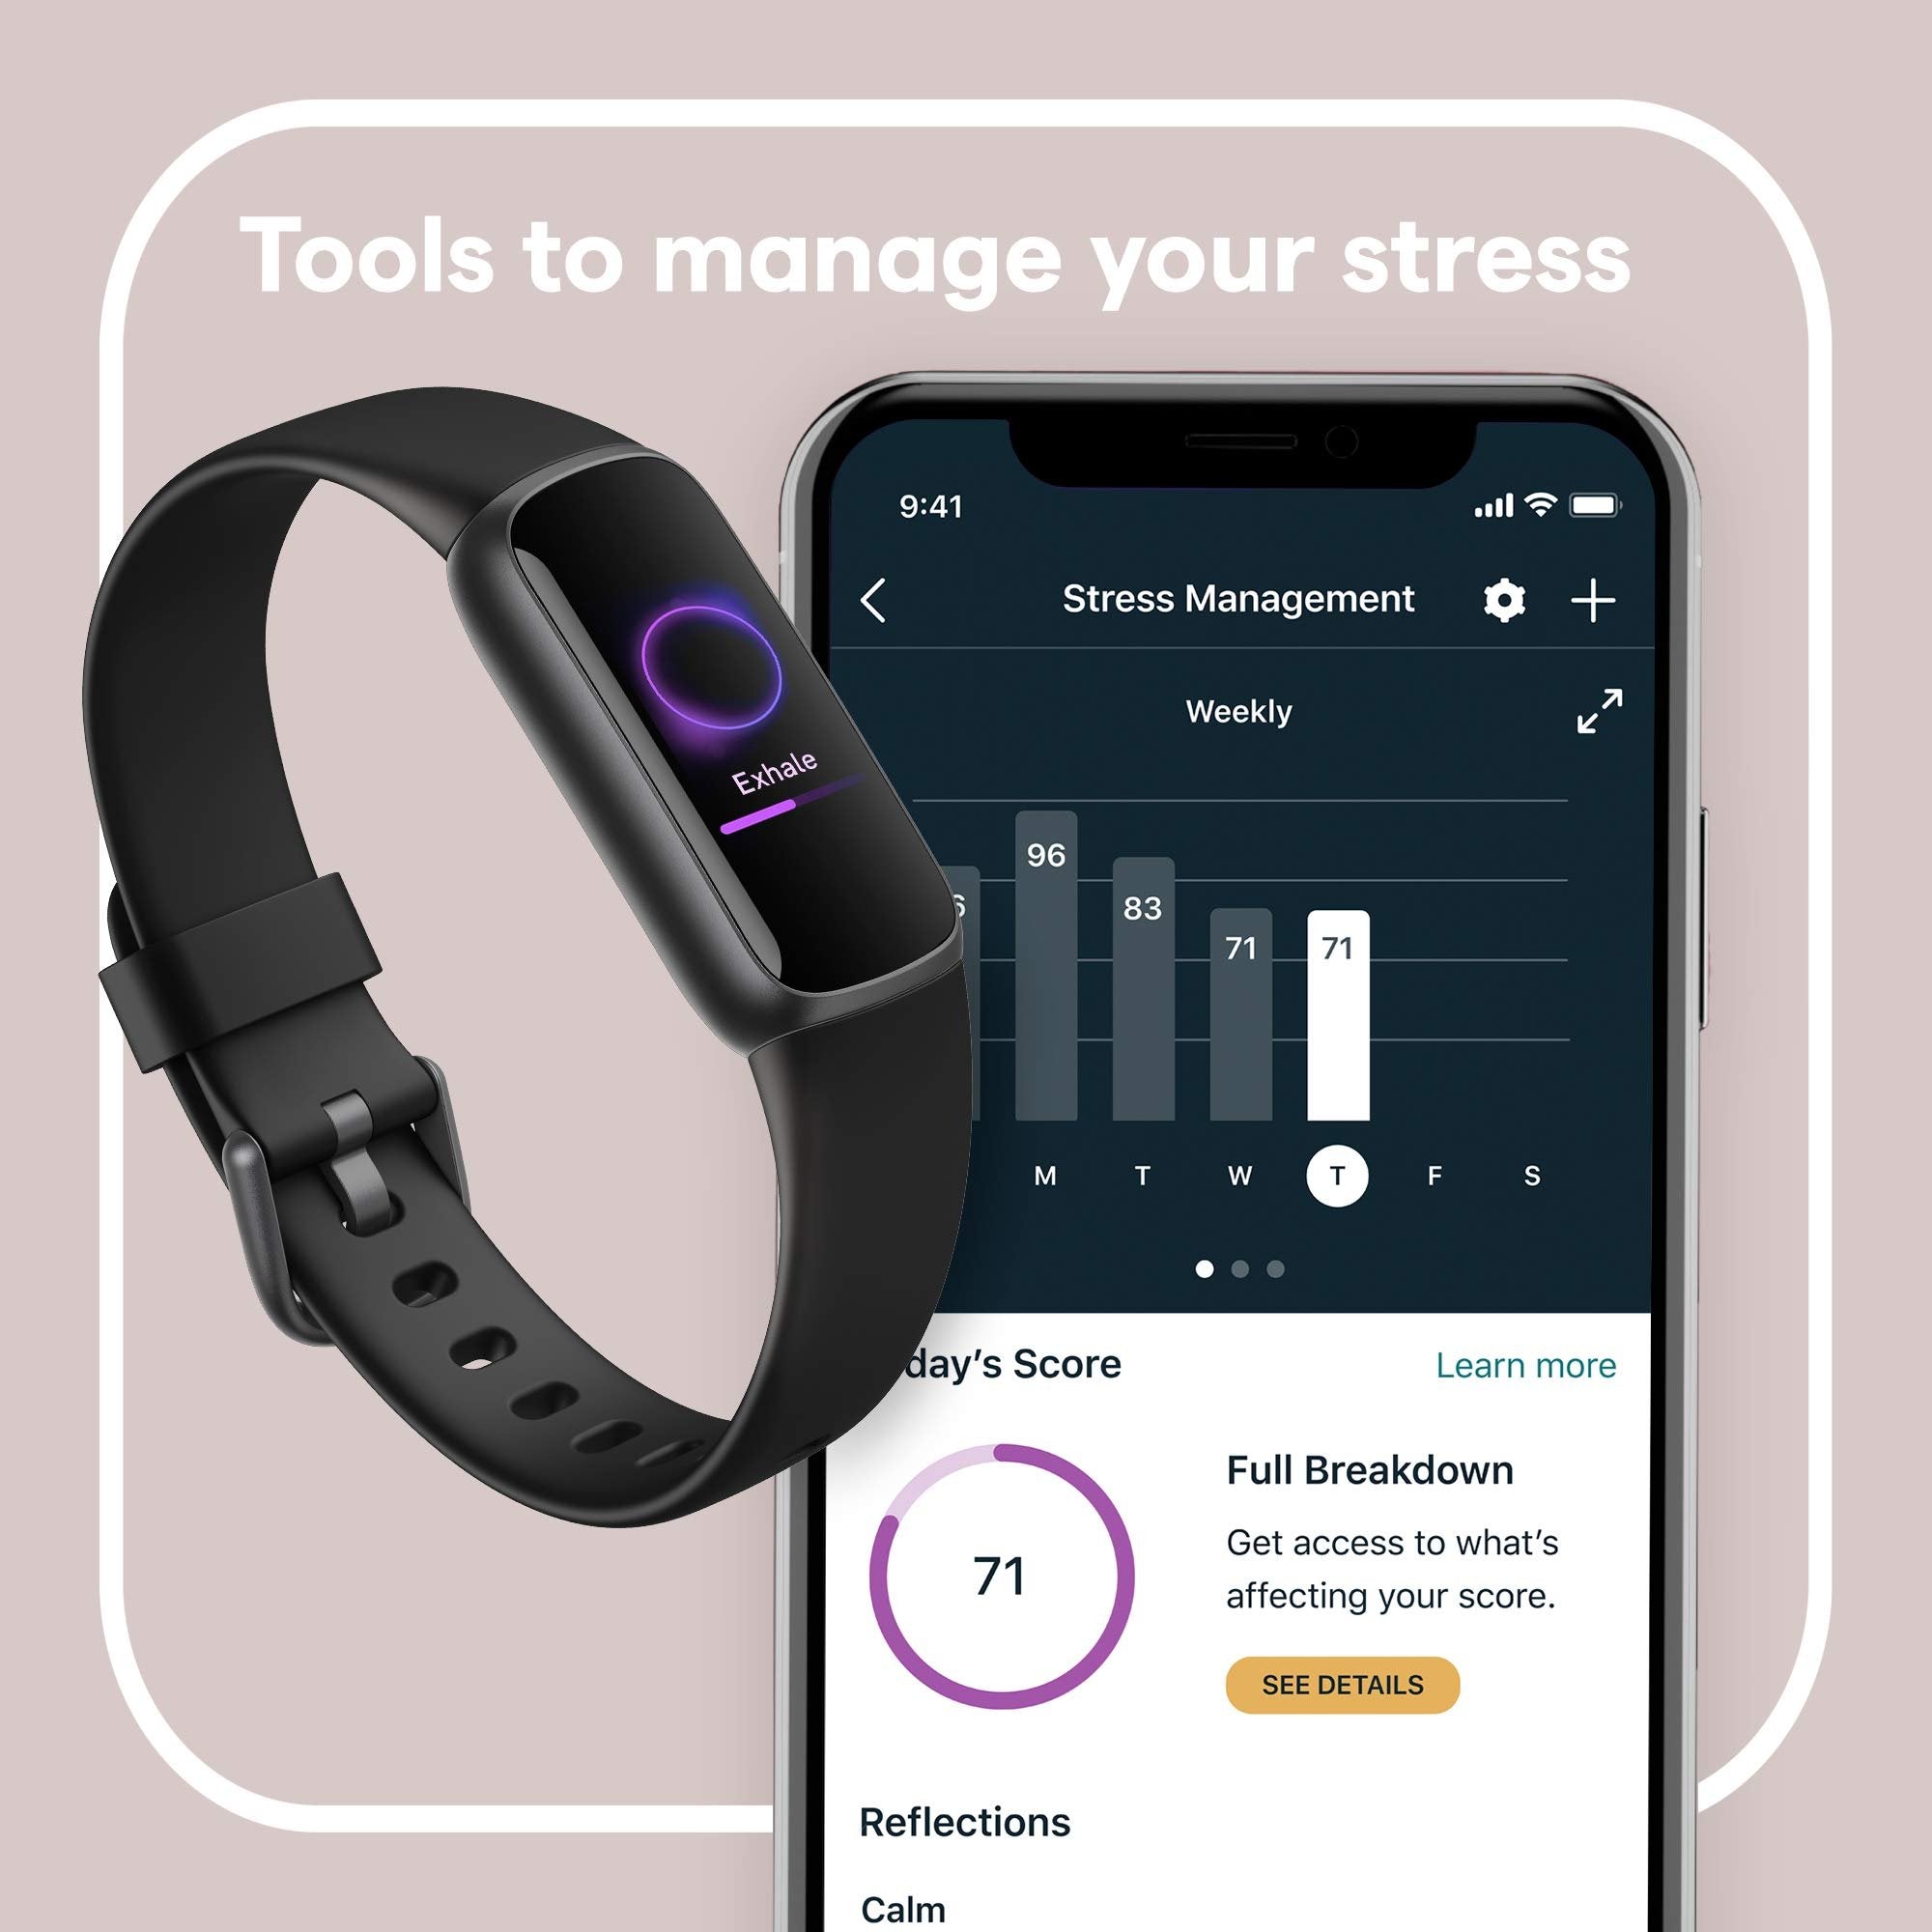 Fitbit Luxe Tracker Black/Graphite - Stress Mgmt, Sleep Tracking, 24/7 HR - One Size (S/L Bands) + Free Shipping